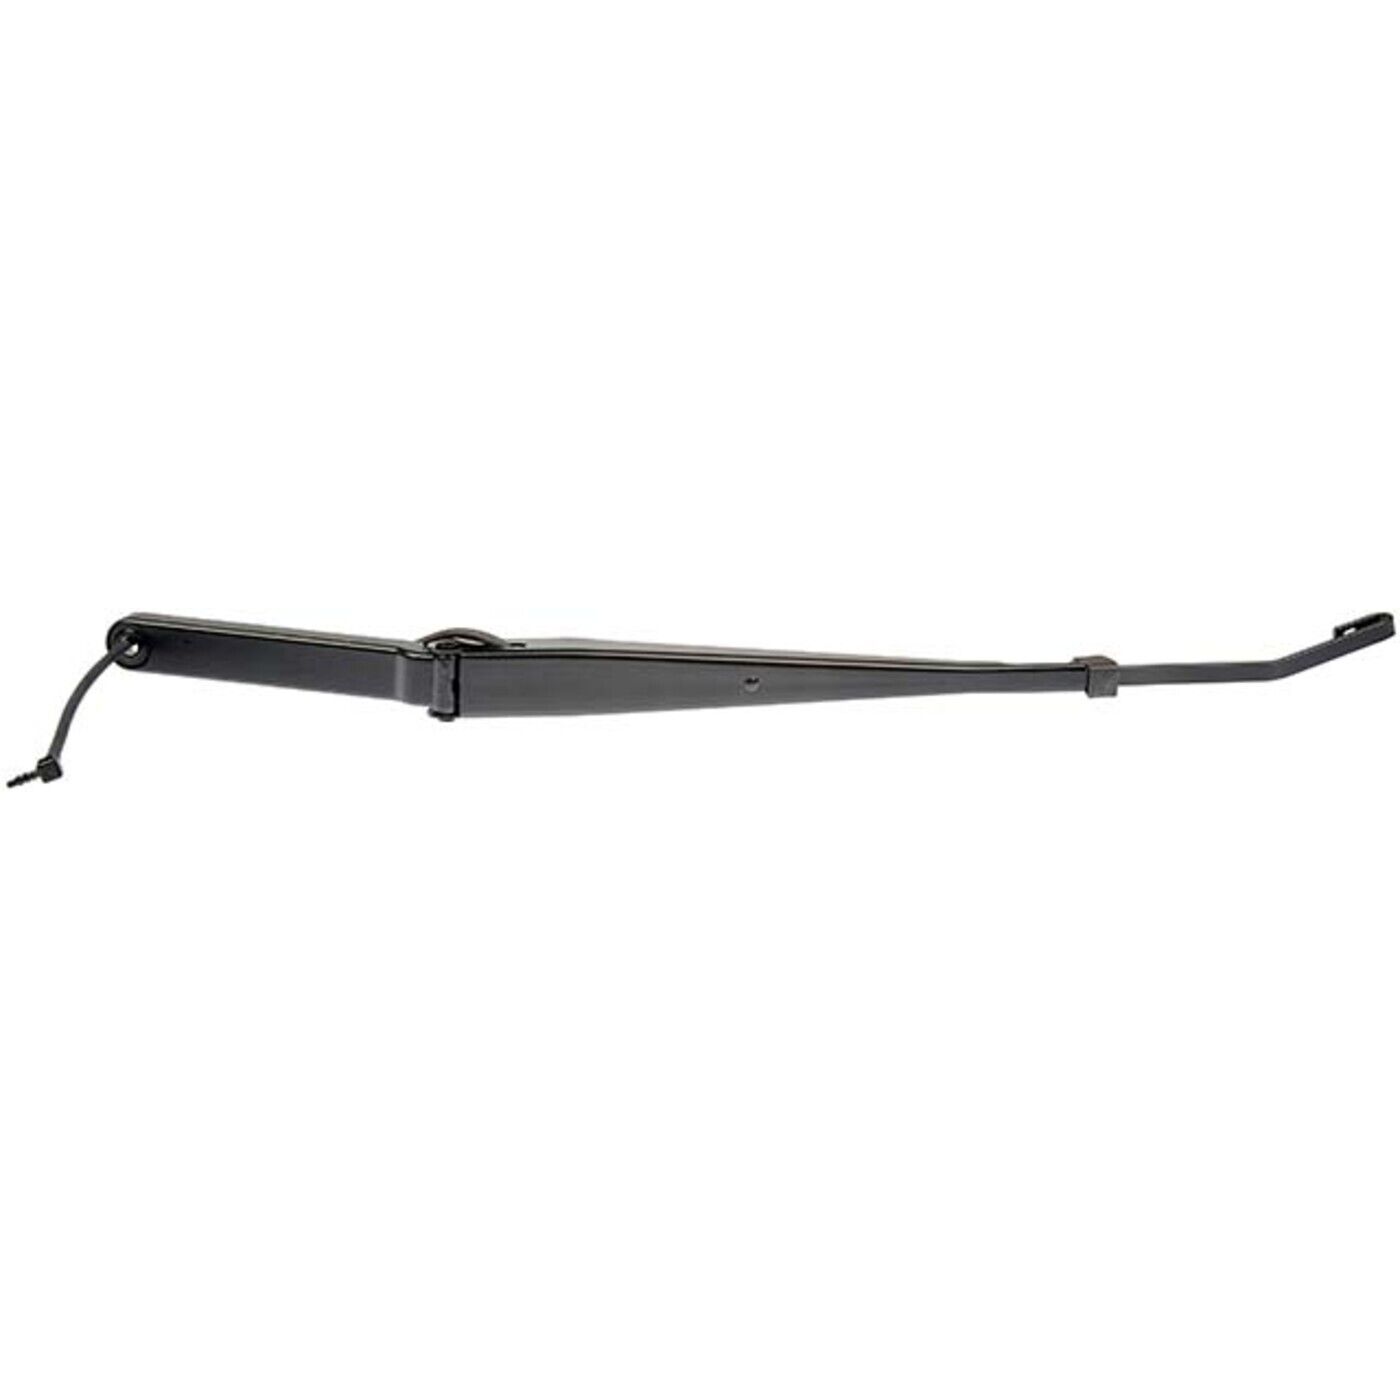 Dorman 42547 Windshield Wiper Arms Front Driver Left Side for Chevy Avalanche